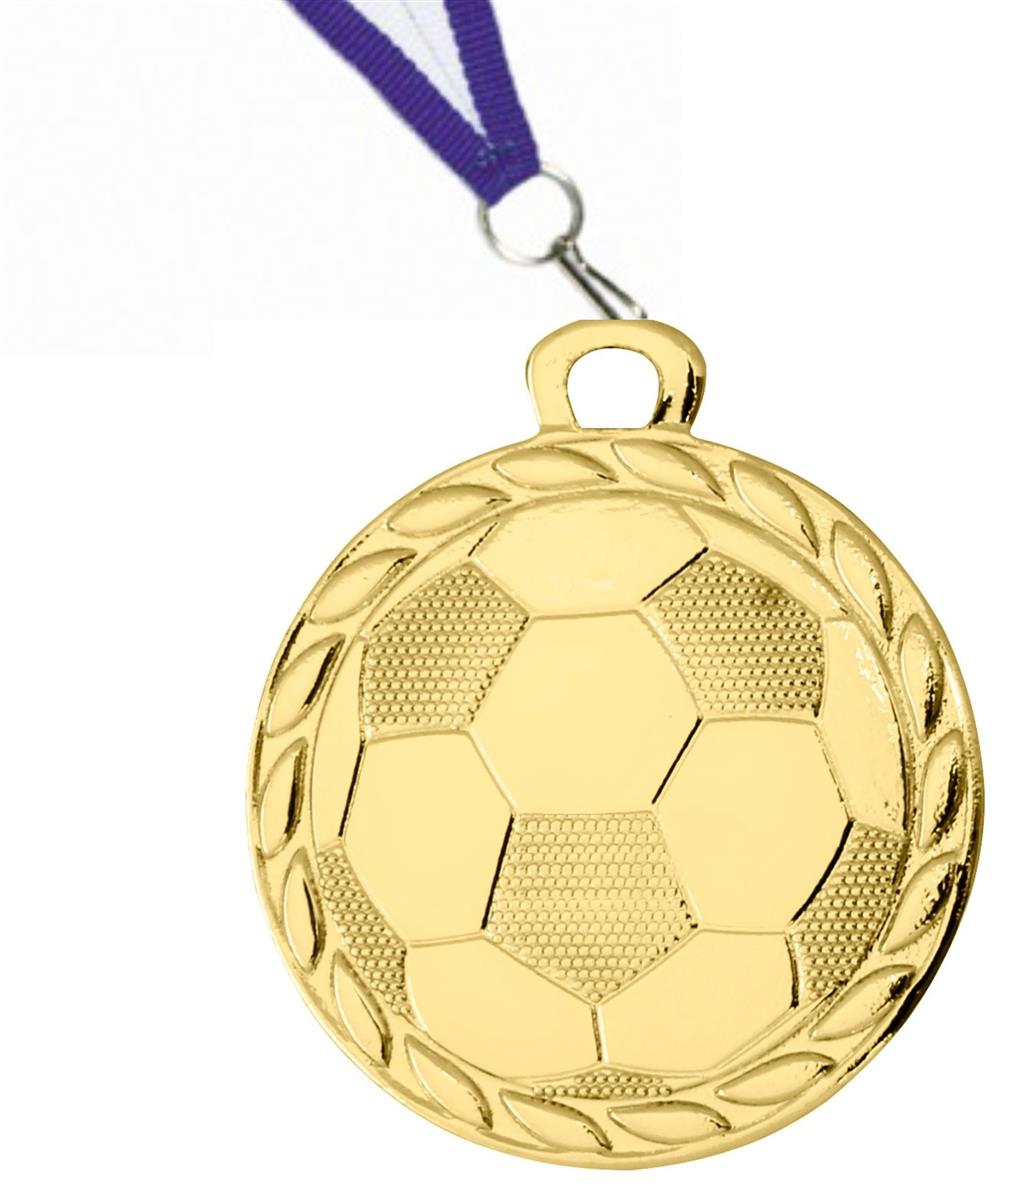 Kleine Fußball-Medaille DI3202 inkl. Band